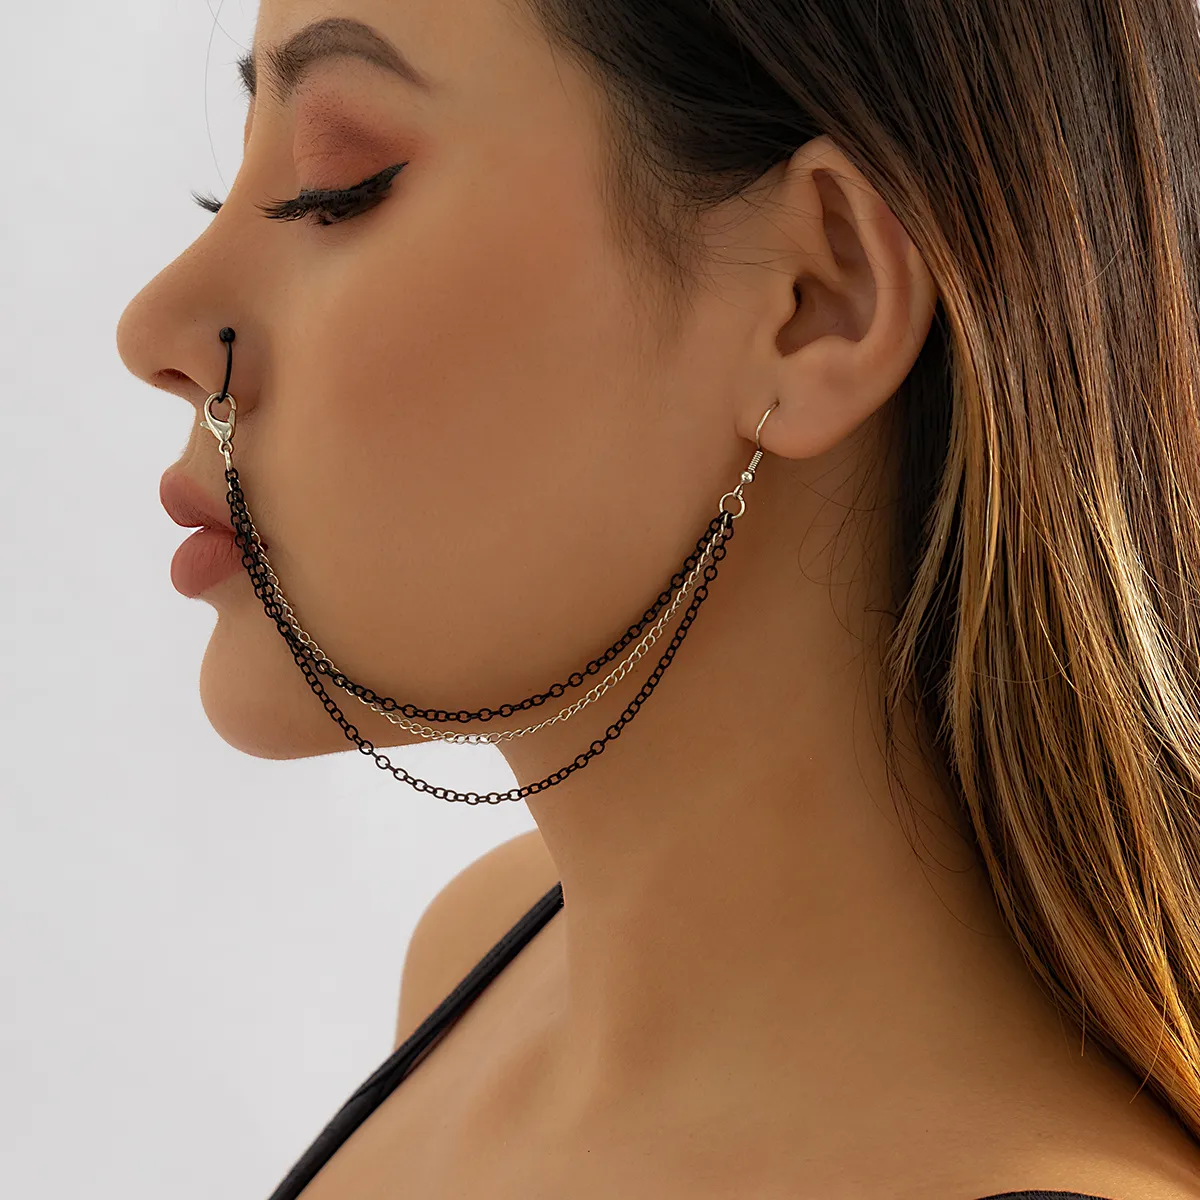 ear to nose chain with captive nose ring hoop by BelladonnaEarlace, $20.00  | Nose jewelry, Nose rings hoop, Nose ring